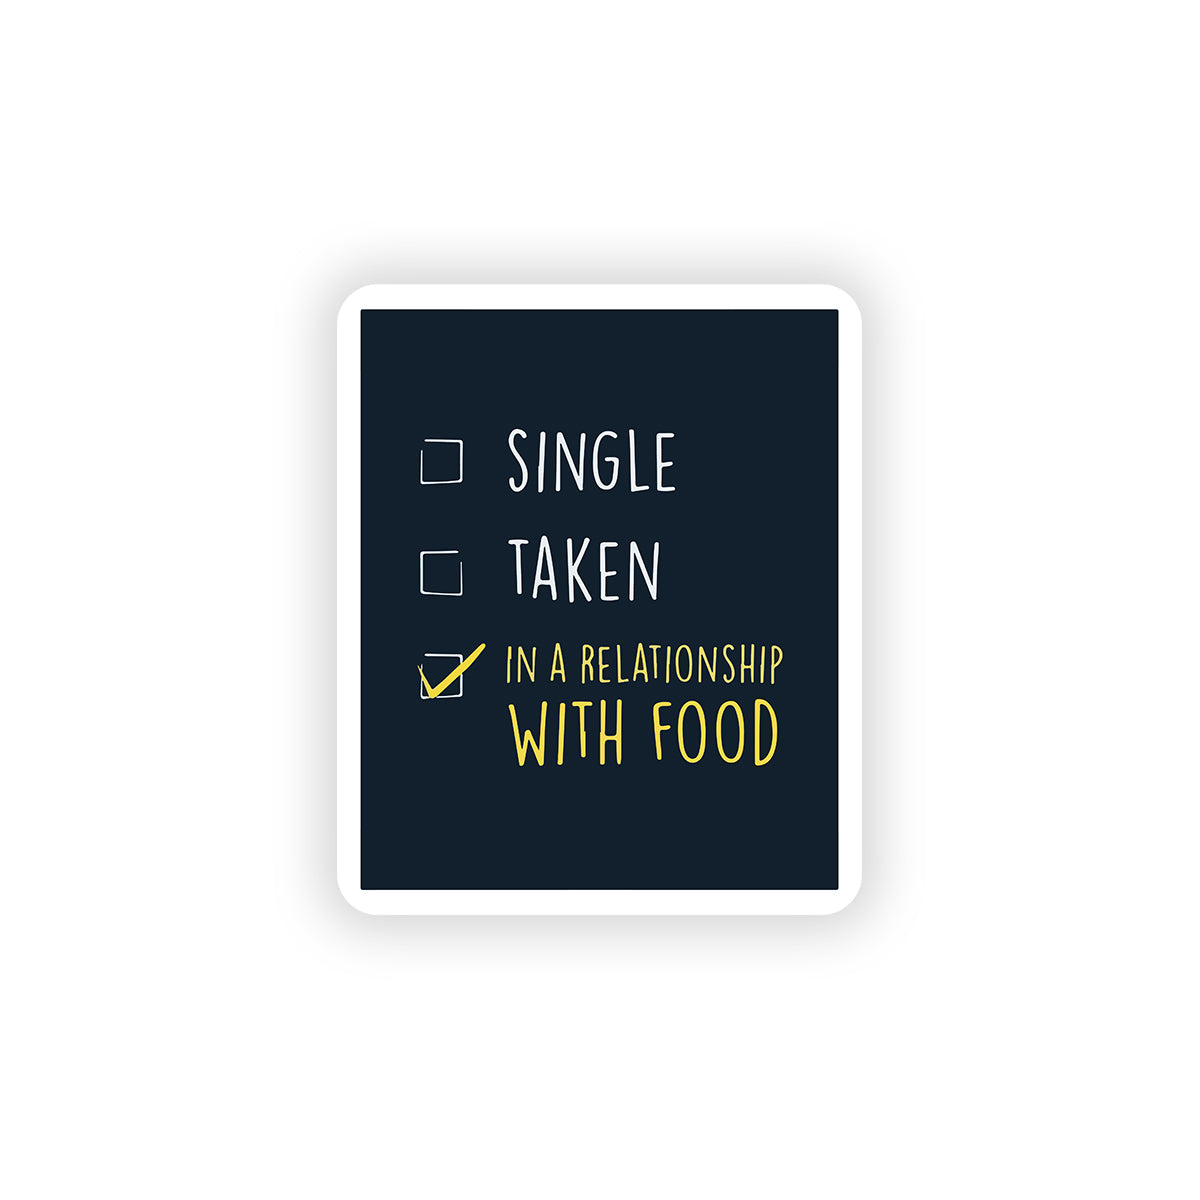 Single taken In a relationship with food